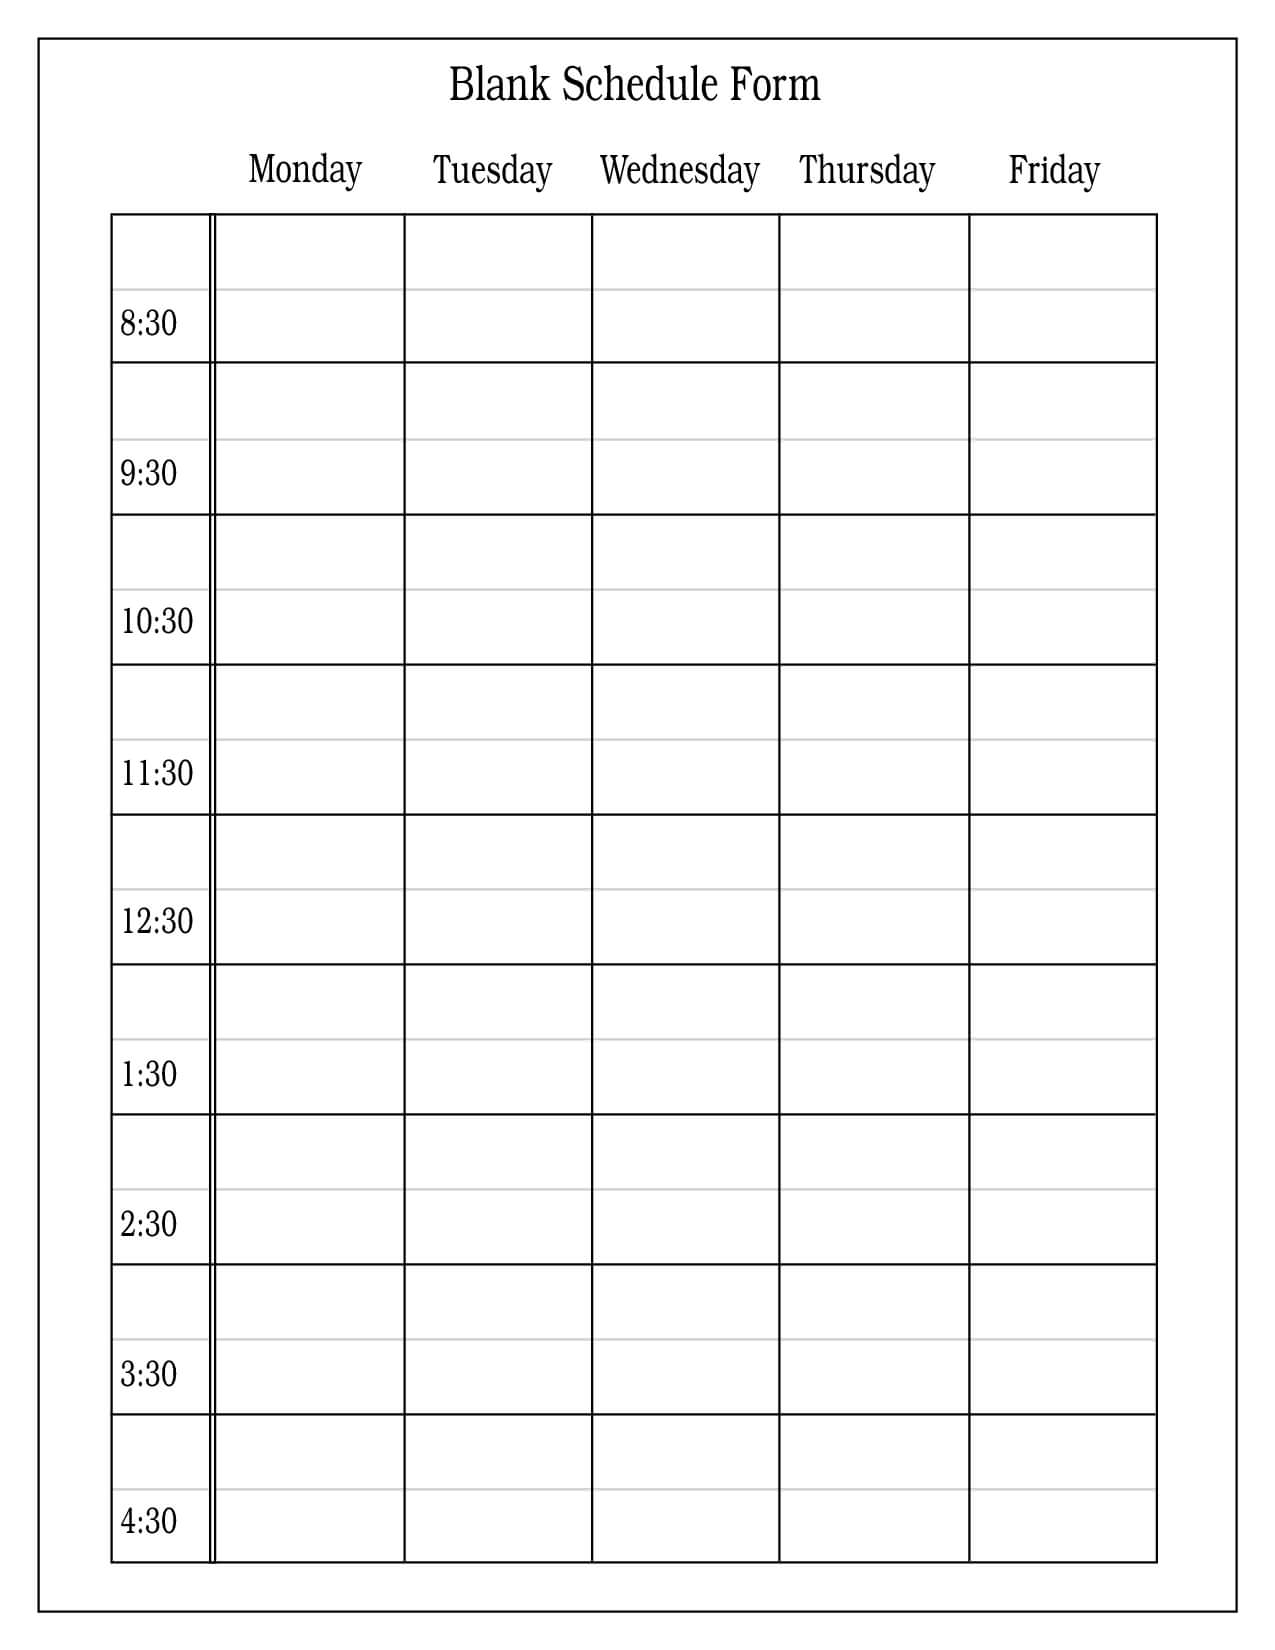 Free+Blank+Daily+Schedule+Form | Daily Schedule Template Regarding Printable Blank Daily Schedule Template